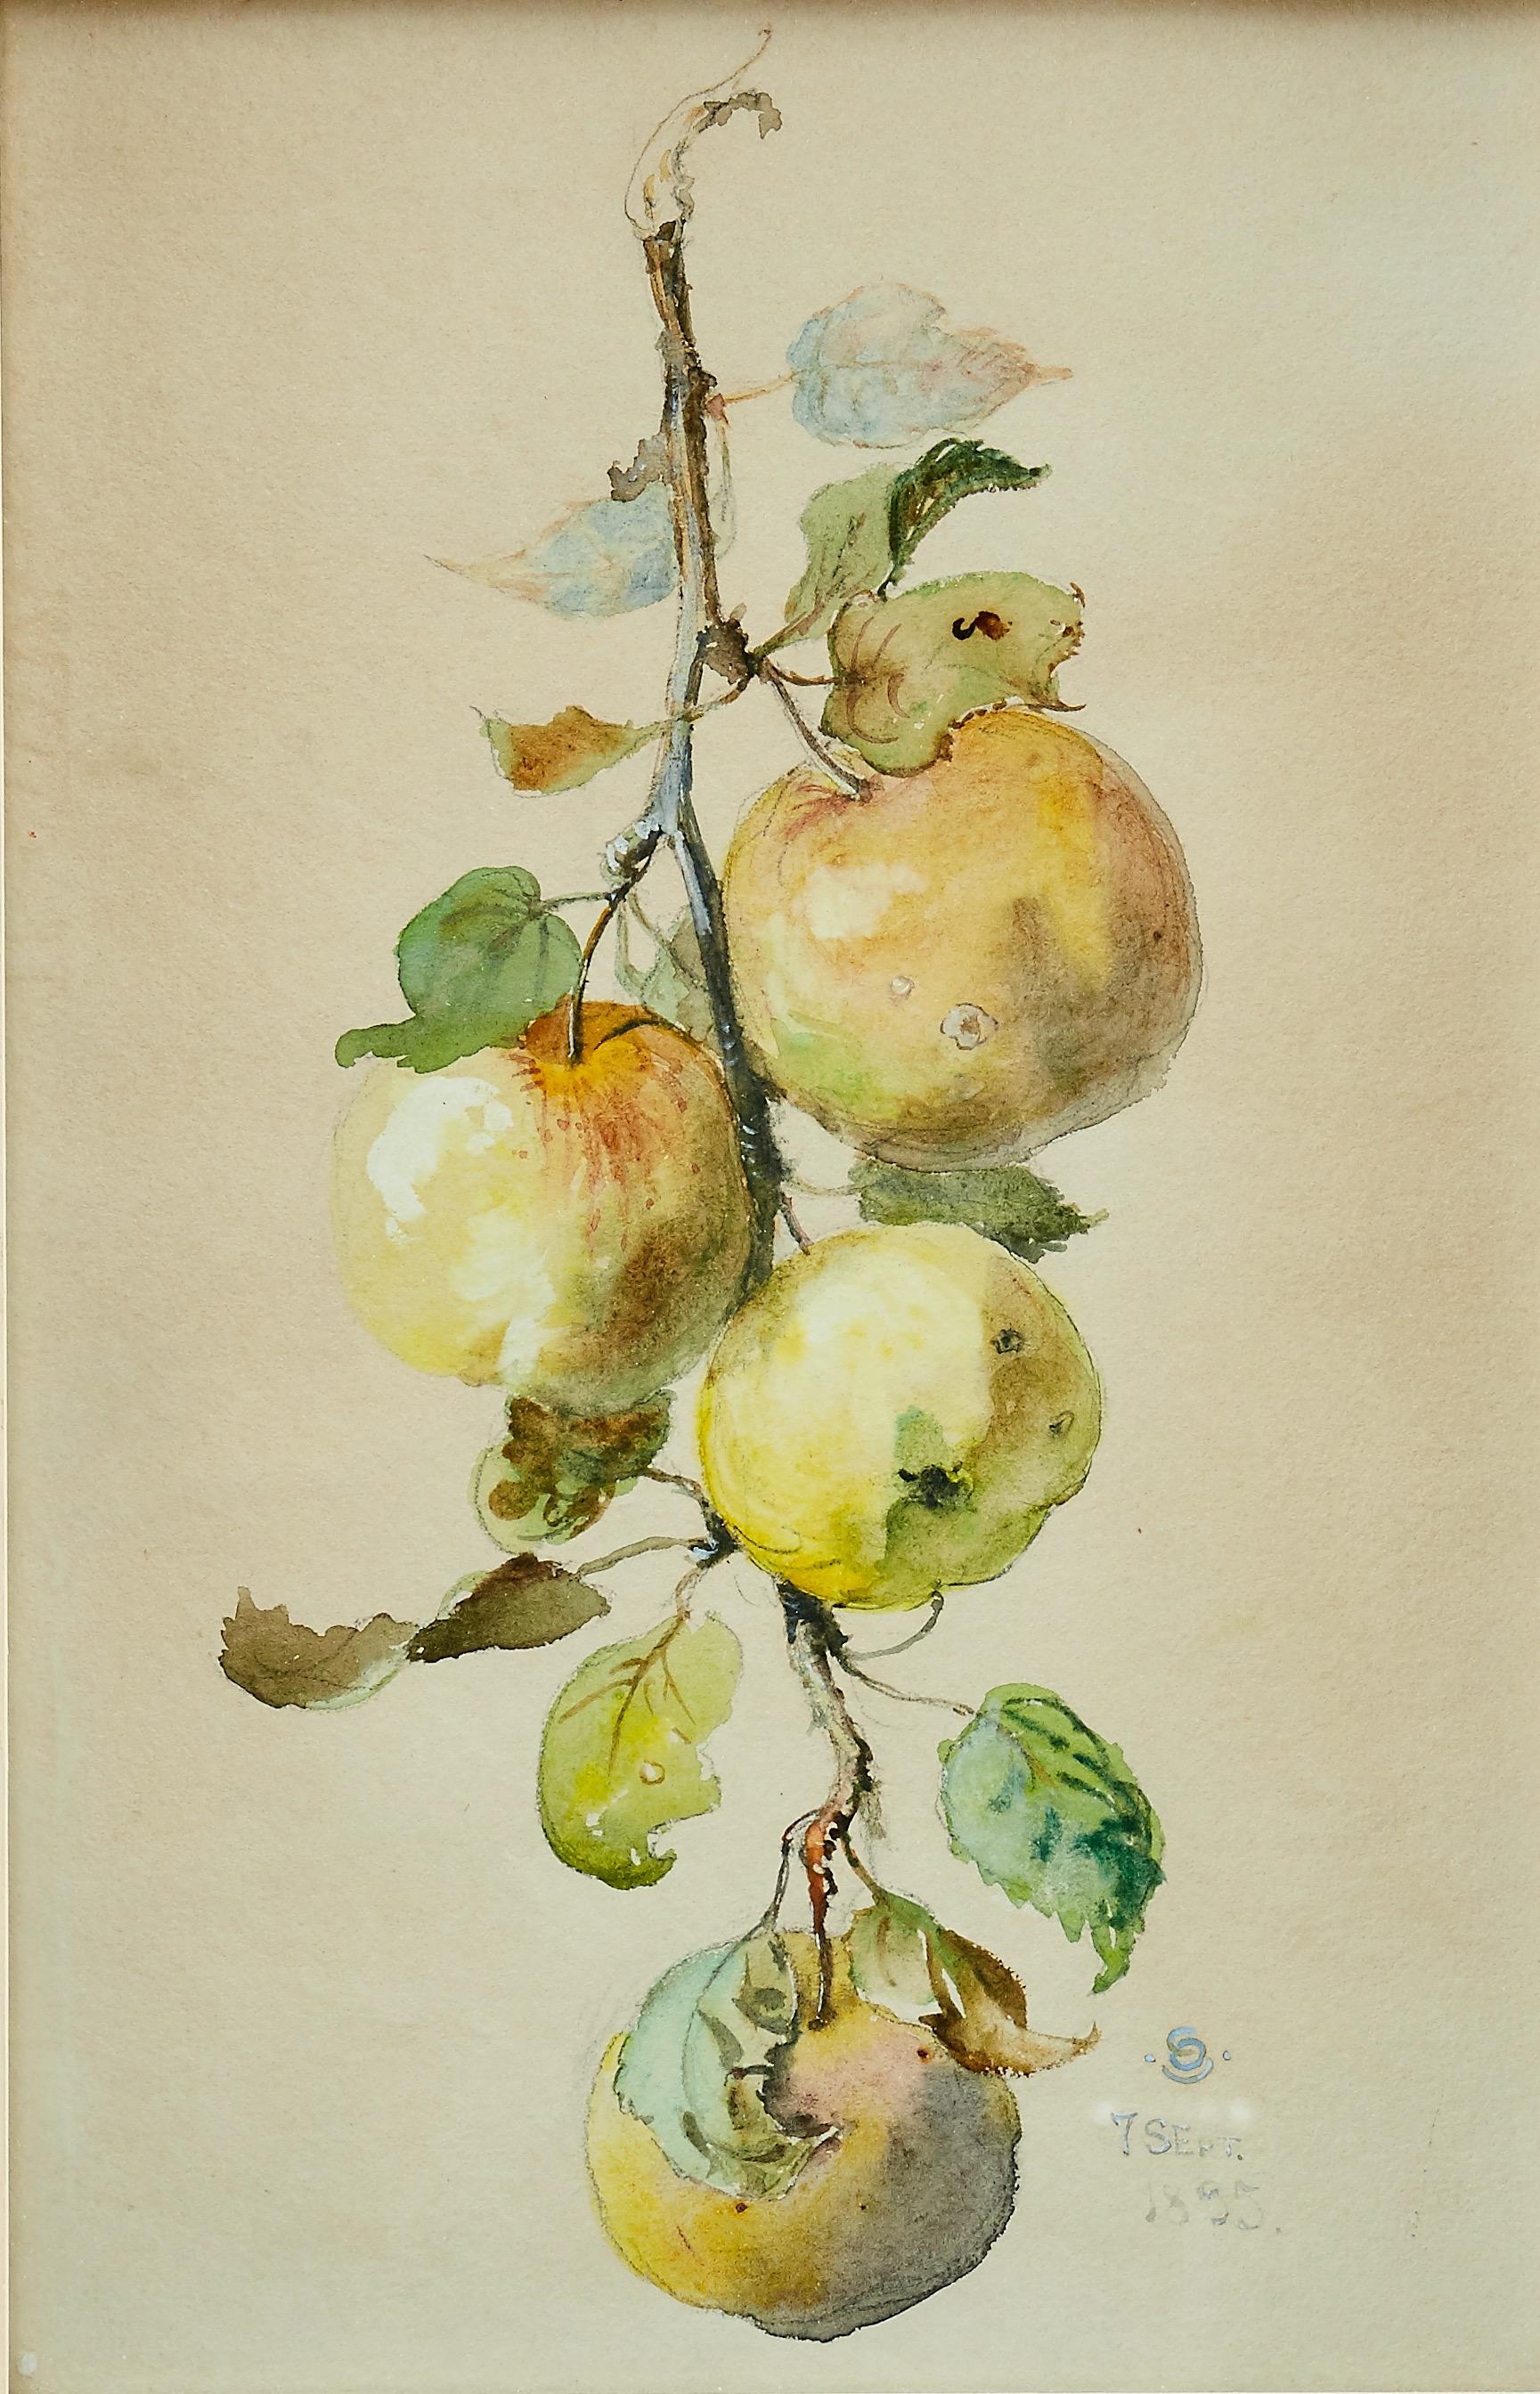 Tree Branch With Apples, Watercolor, 1895 - Painting by Otto Strandman